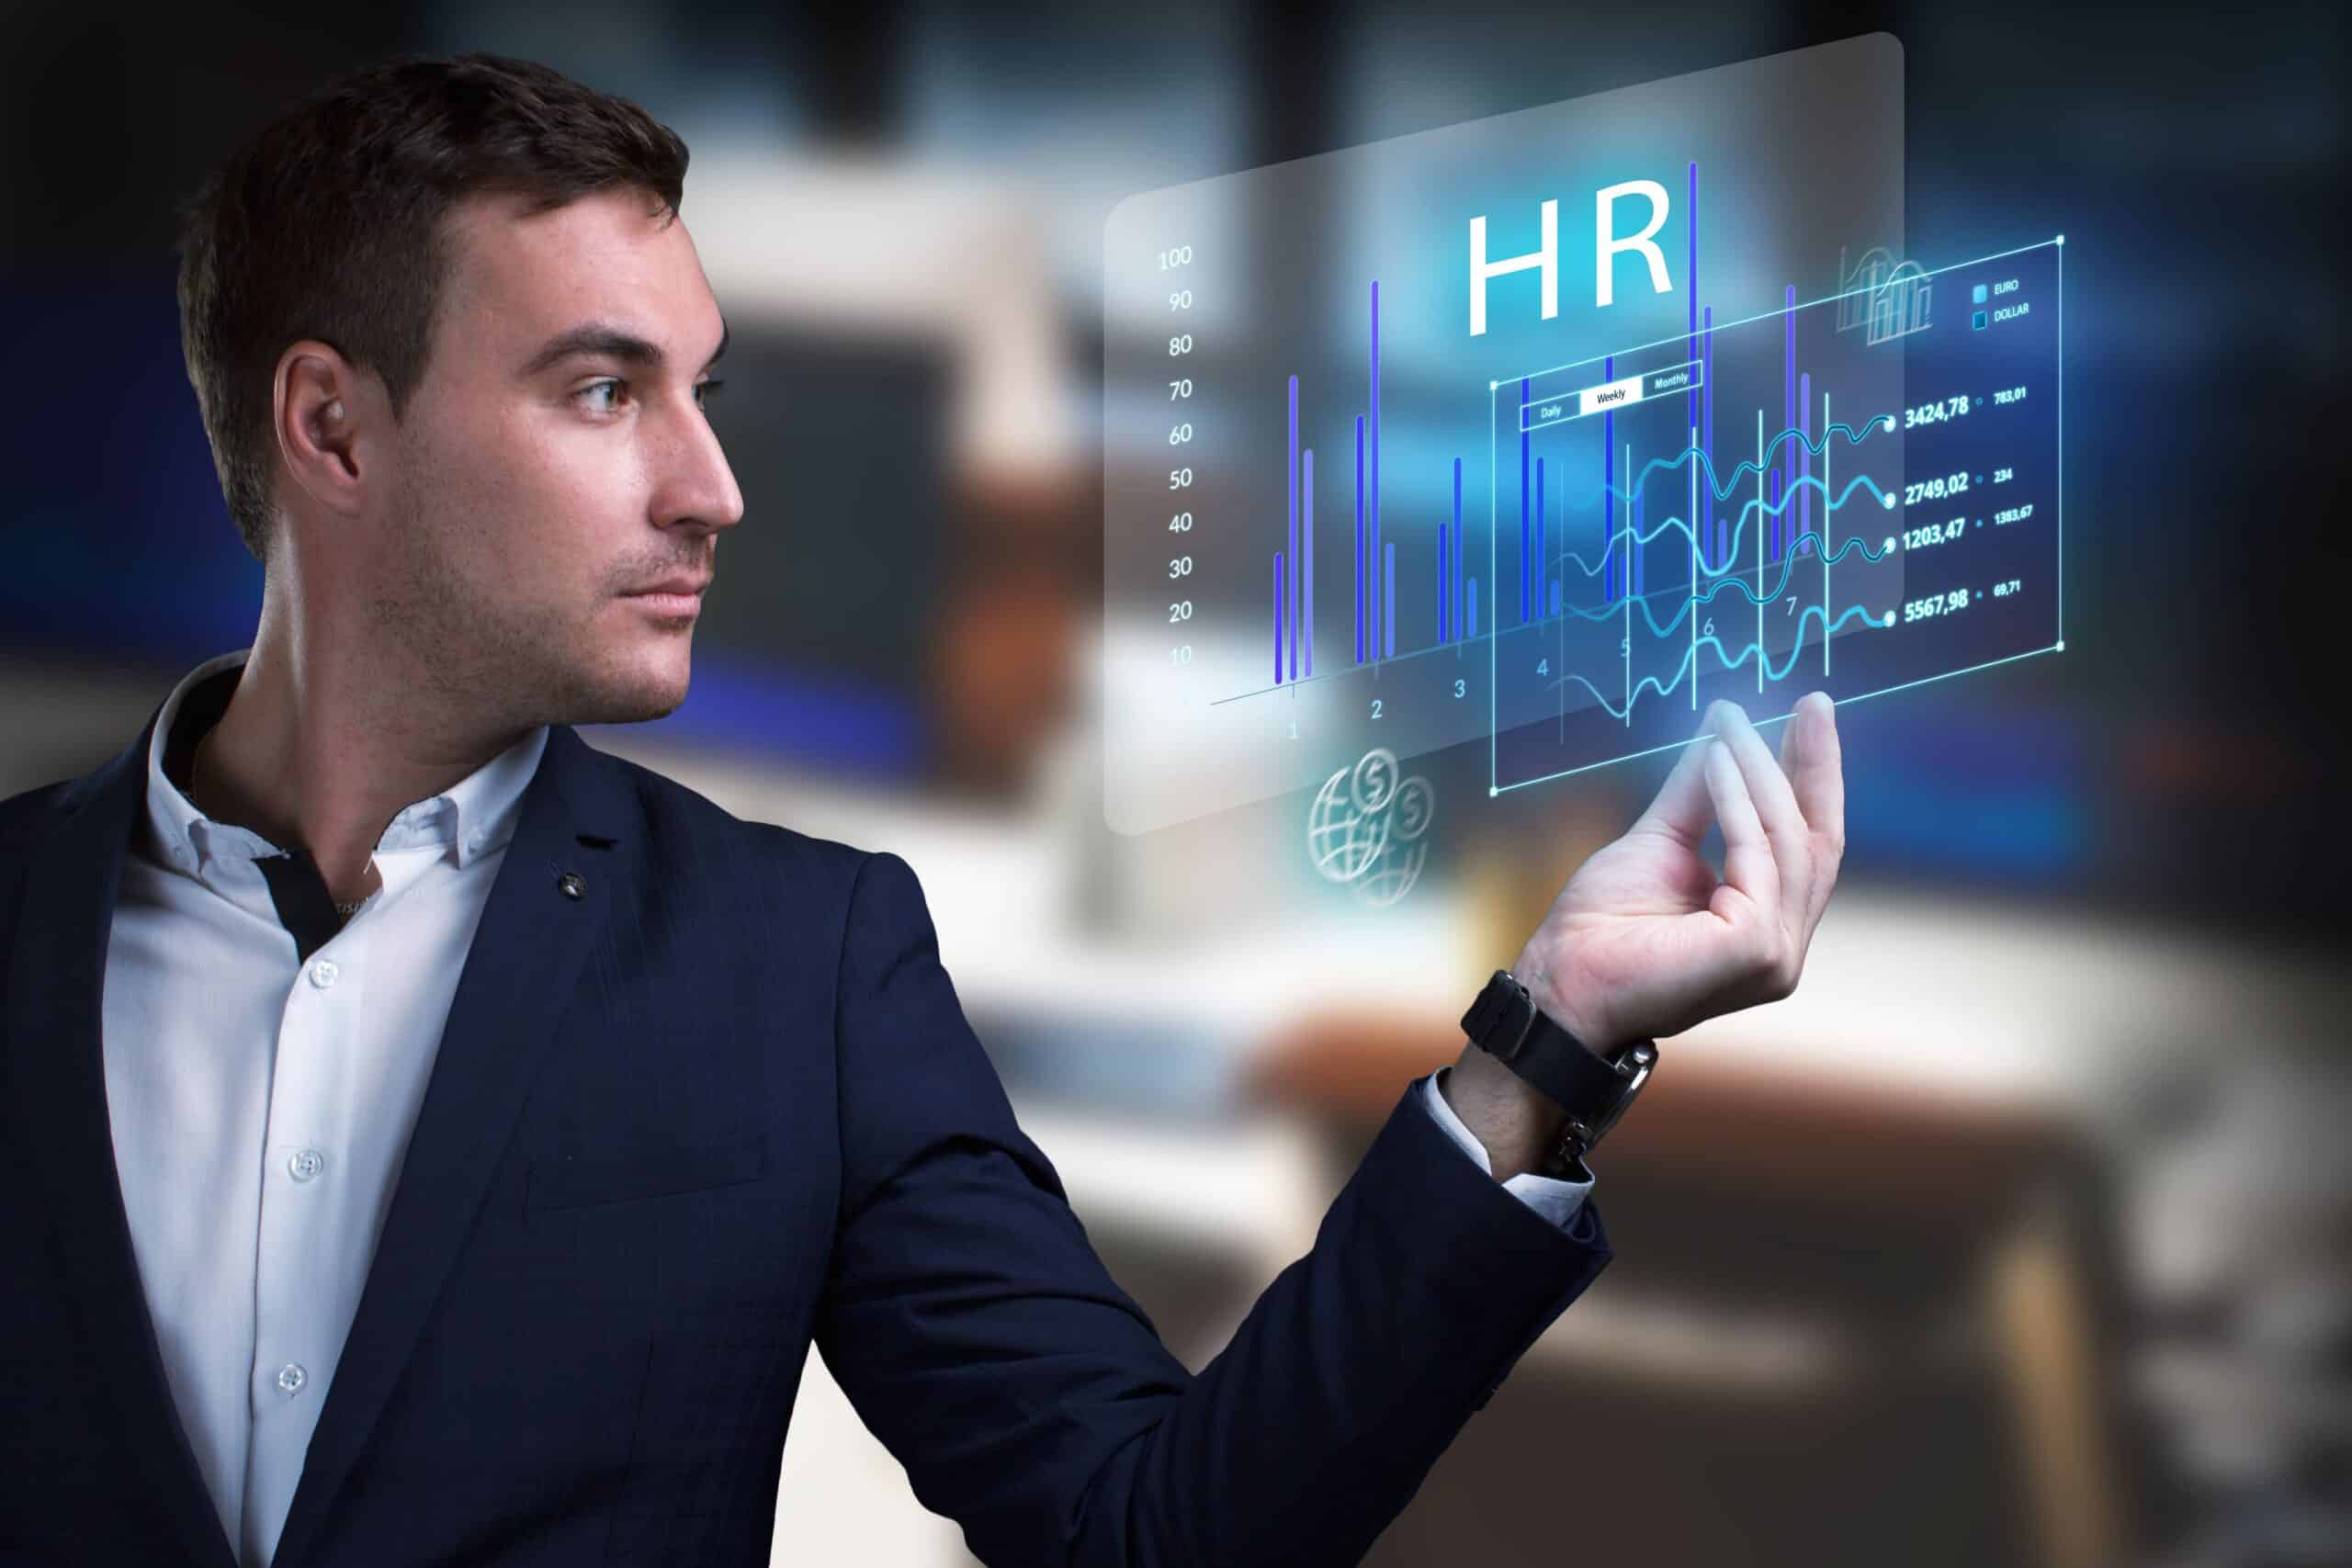 A man dressed in a dark suit is extending his hand, with HR-related infographics floating above it, symbolising modern human resource management.